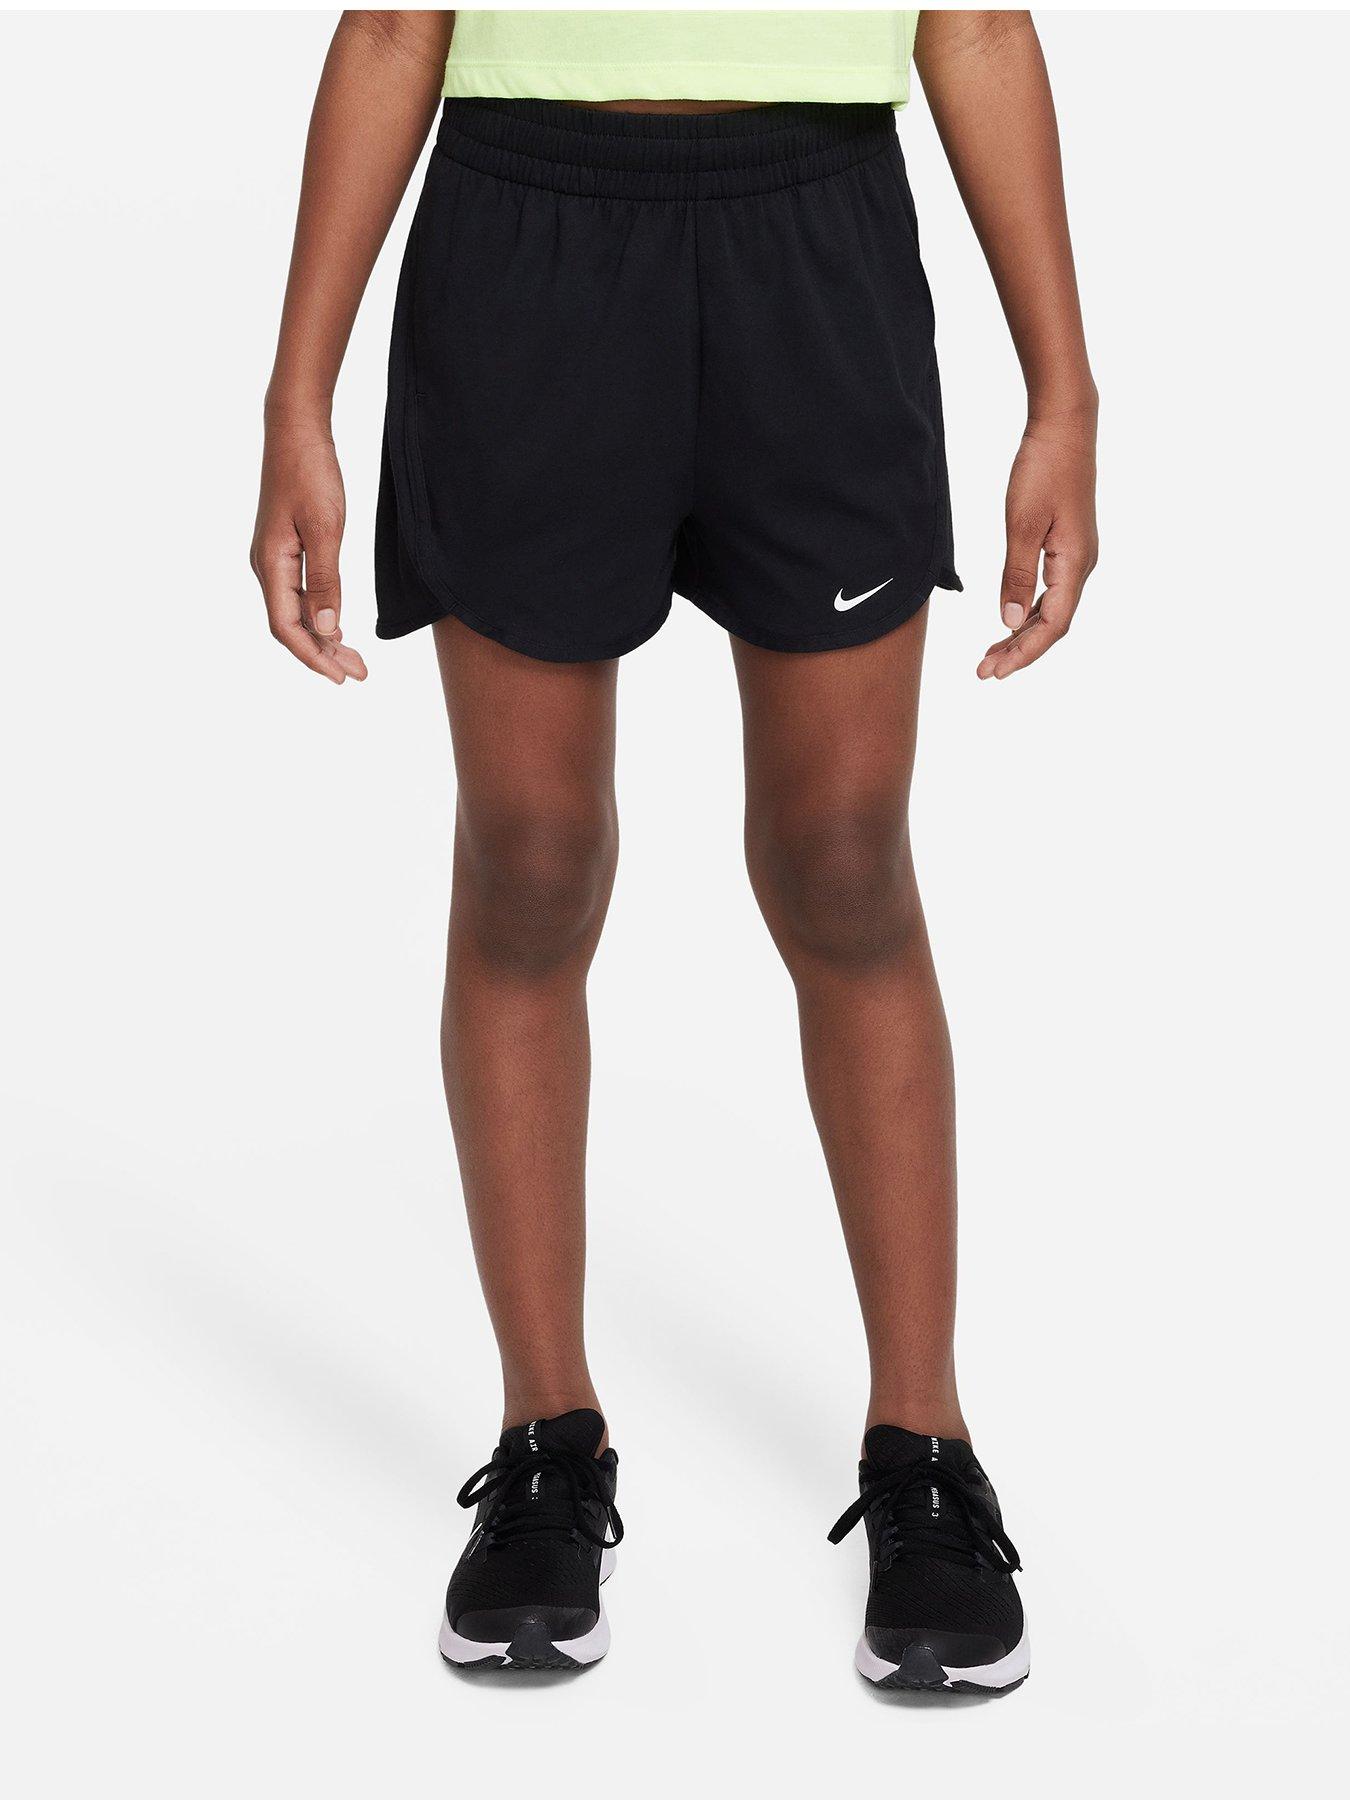 Youth Girls Athletic Shorts Girls Soccer Shorts Basketball Shorts Kids  Workout Gym Clothes Girls (Black, 7-8 Years) : : Clothing, Shoes &  Accessories